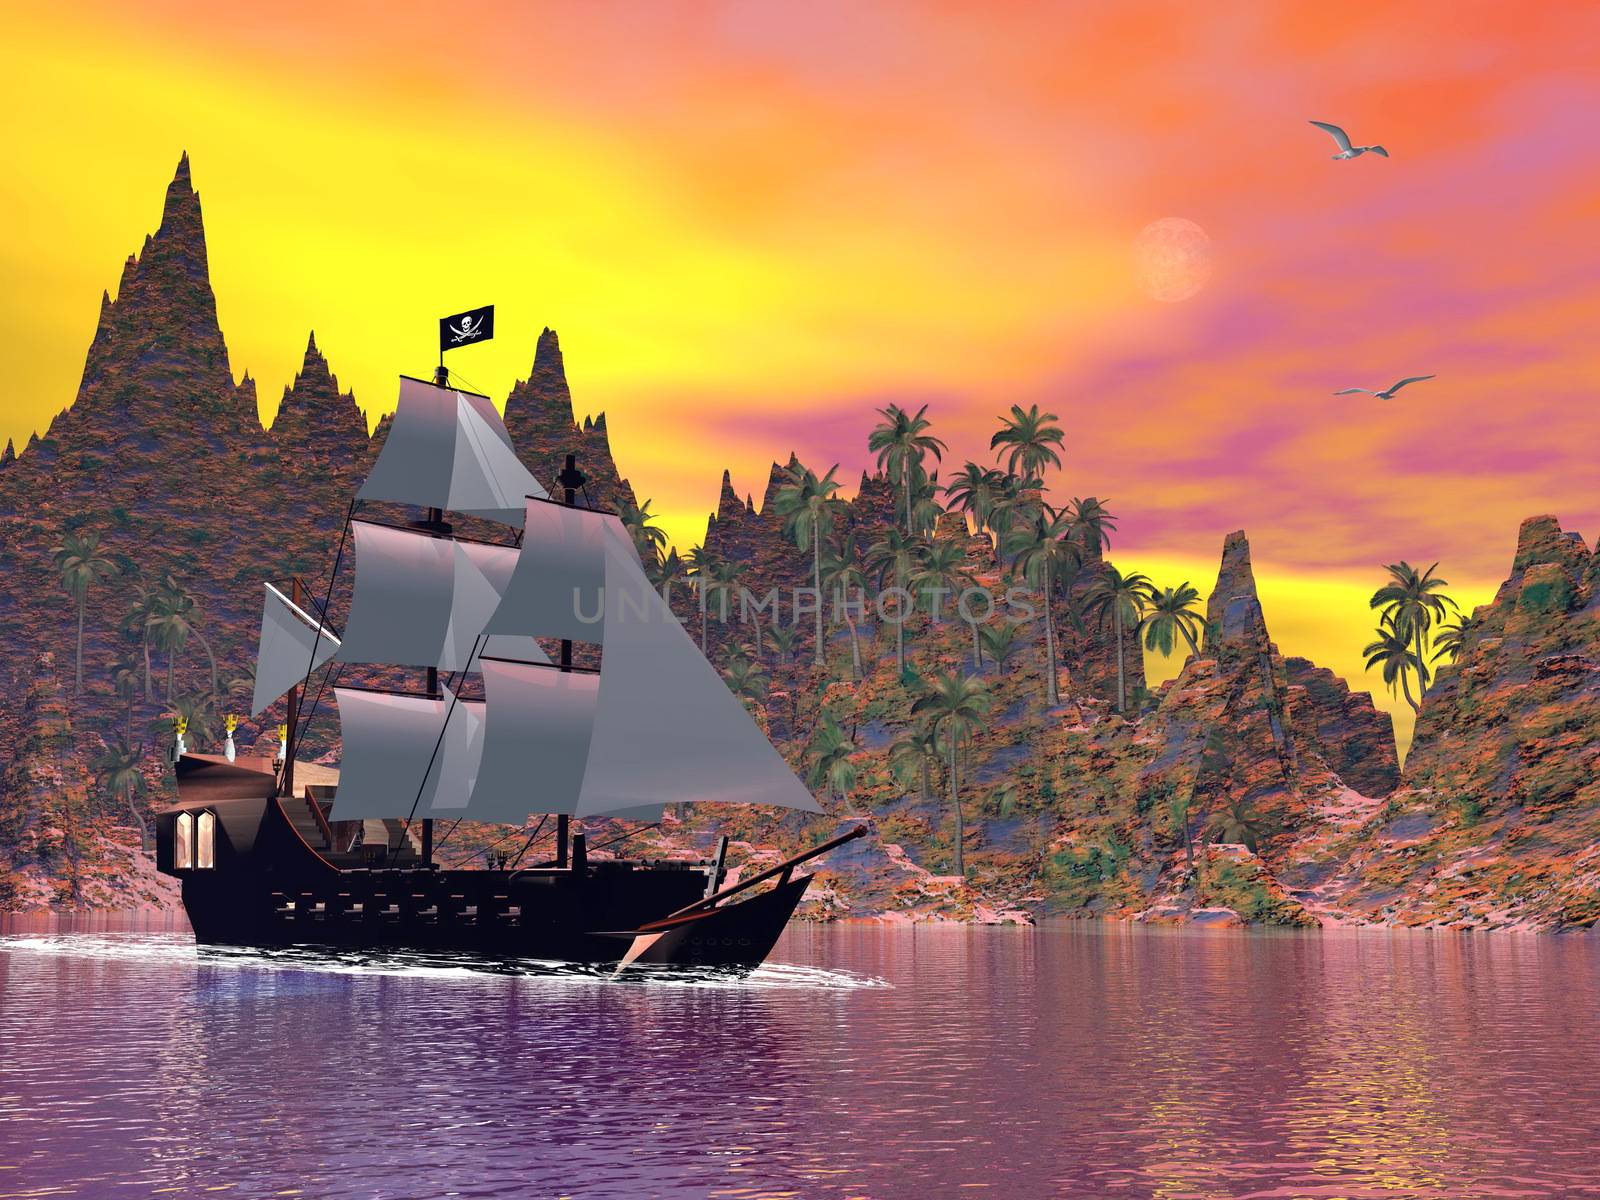 Pirate ship by sunset - 3D render by Elenaphotos21